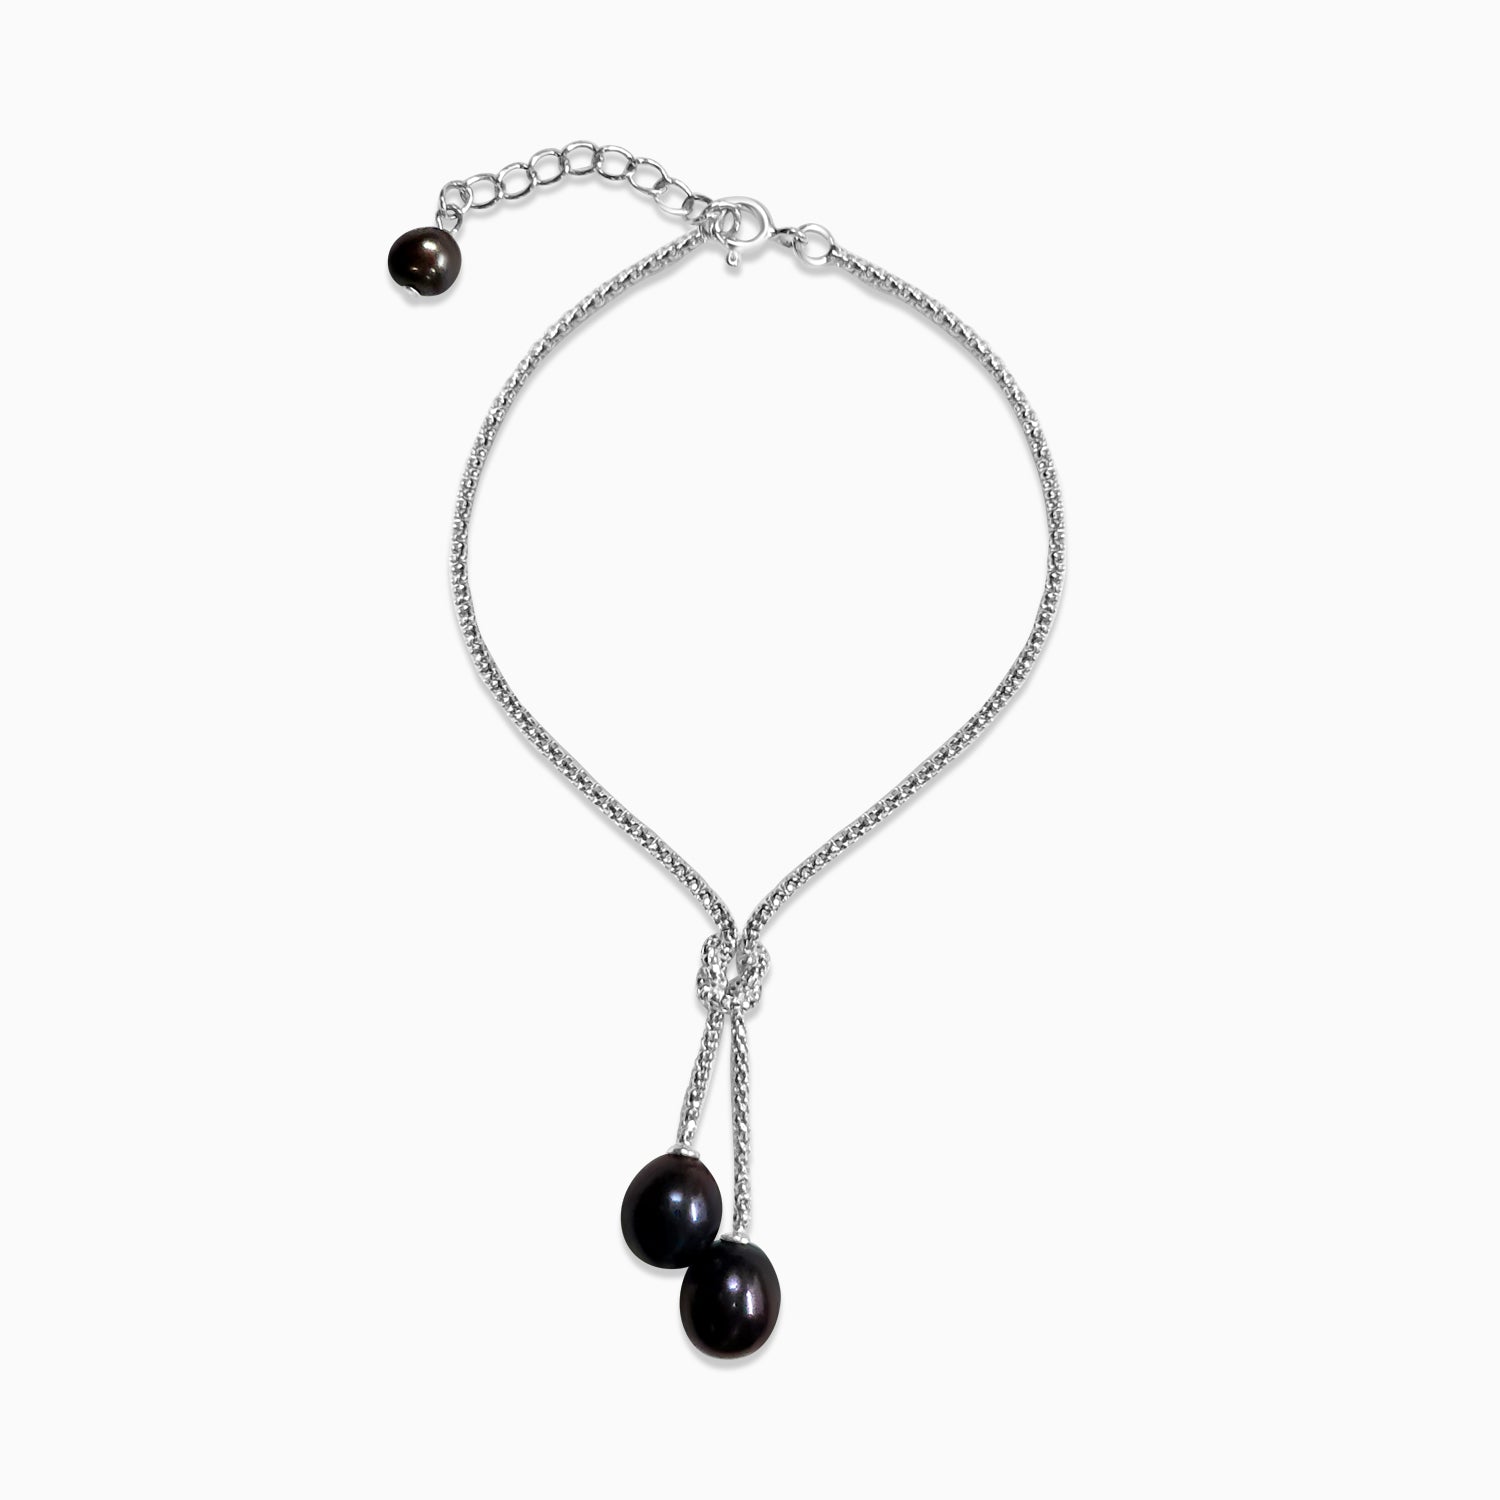 Silver Knotted Italian Chain Black Pearl Bracelet